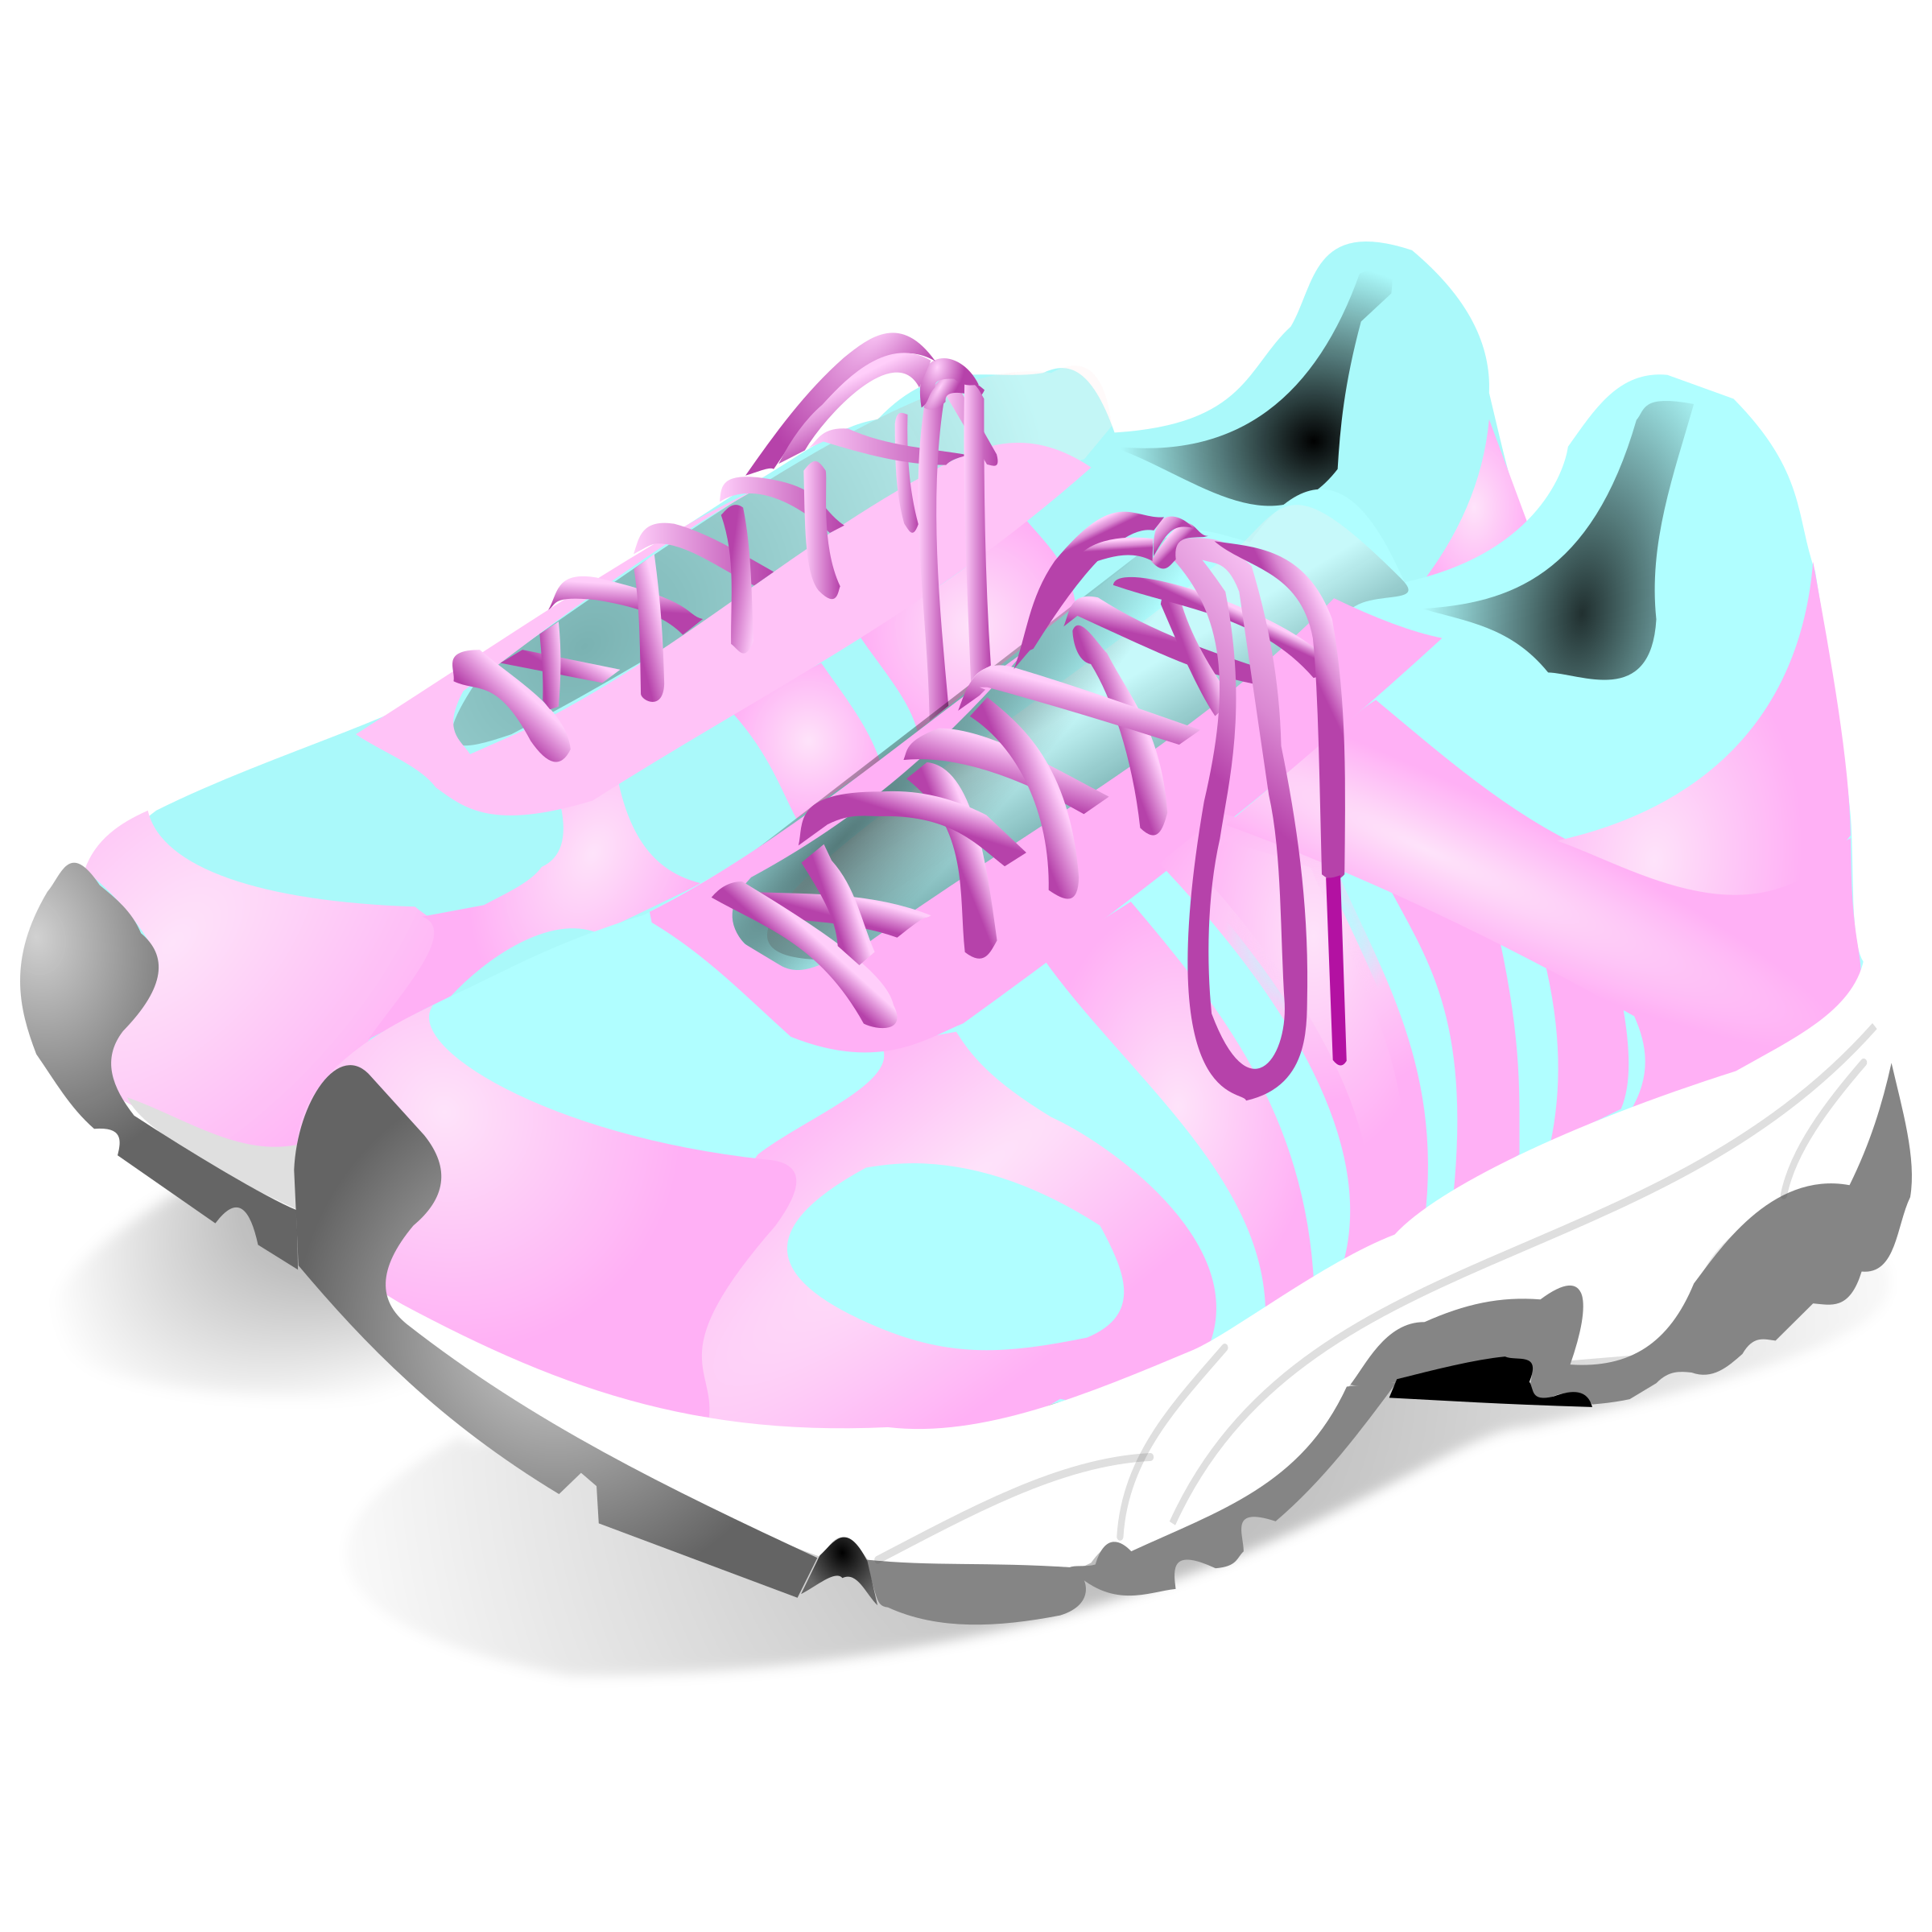 Big Image (Png) - Sneakers, Transparent background PNG HD thumbnail